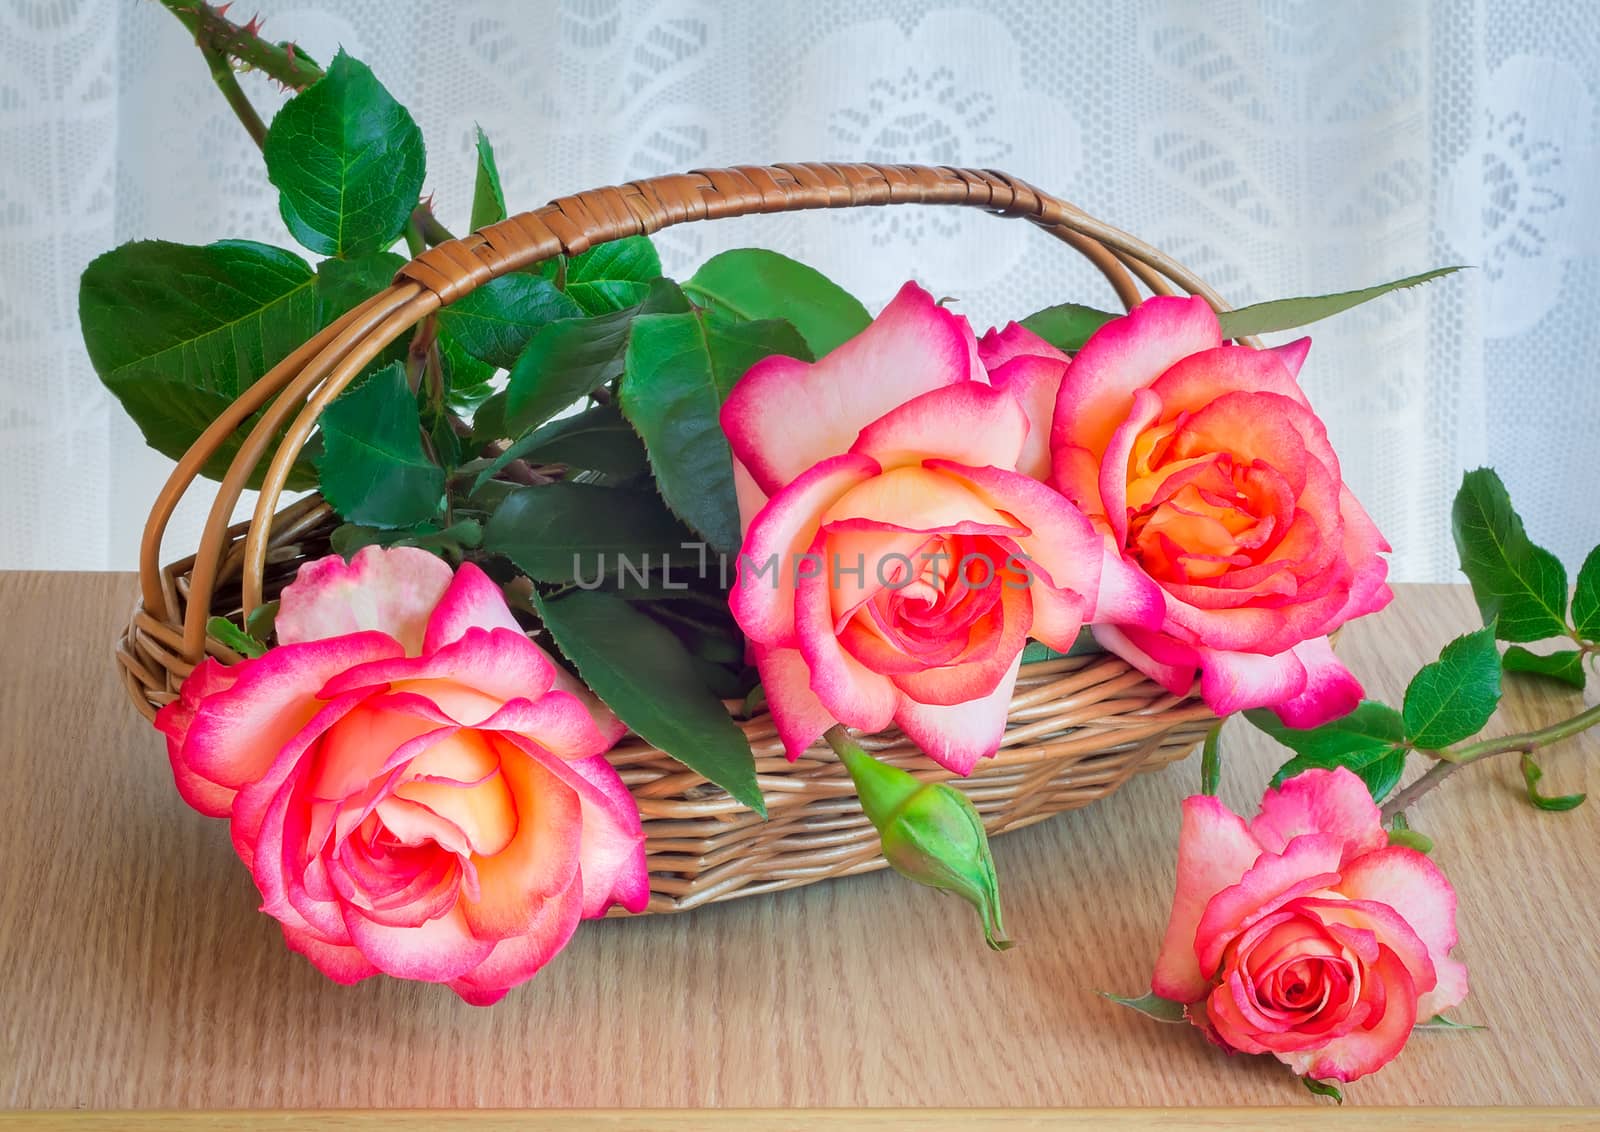 Beautiful large roses with leaves in a wicker basket on the tabl by georgina198